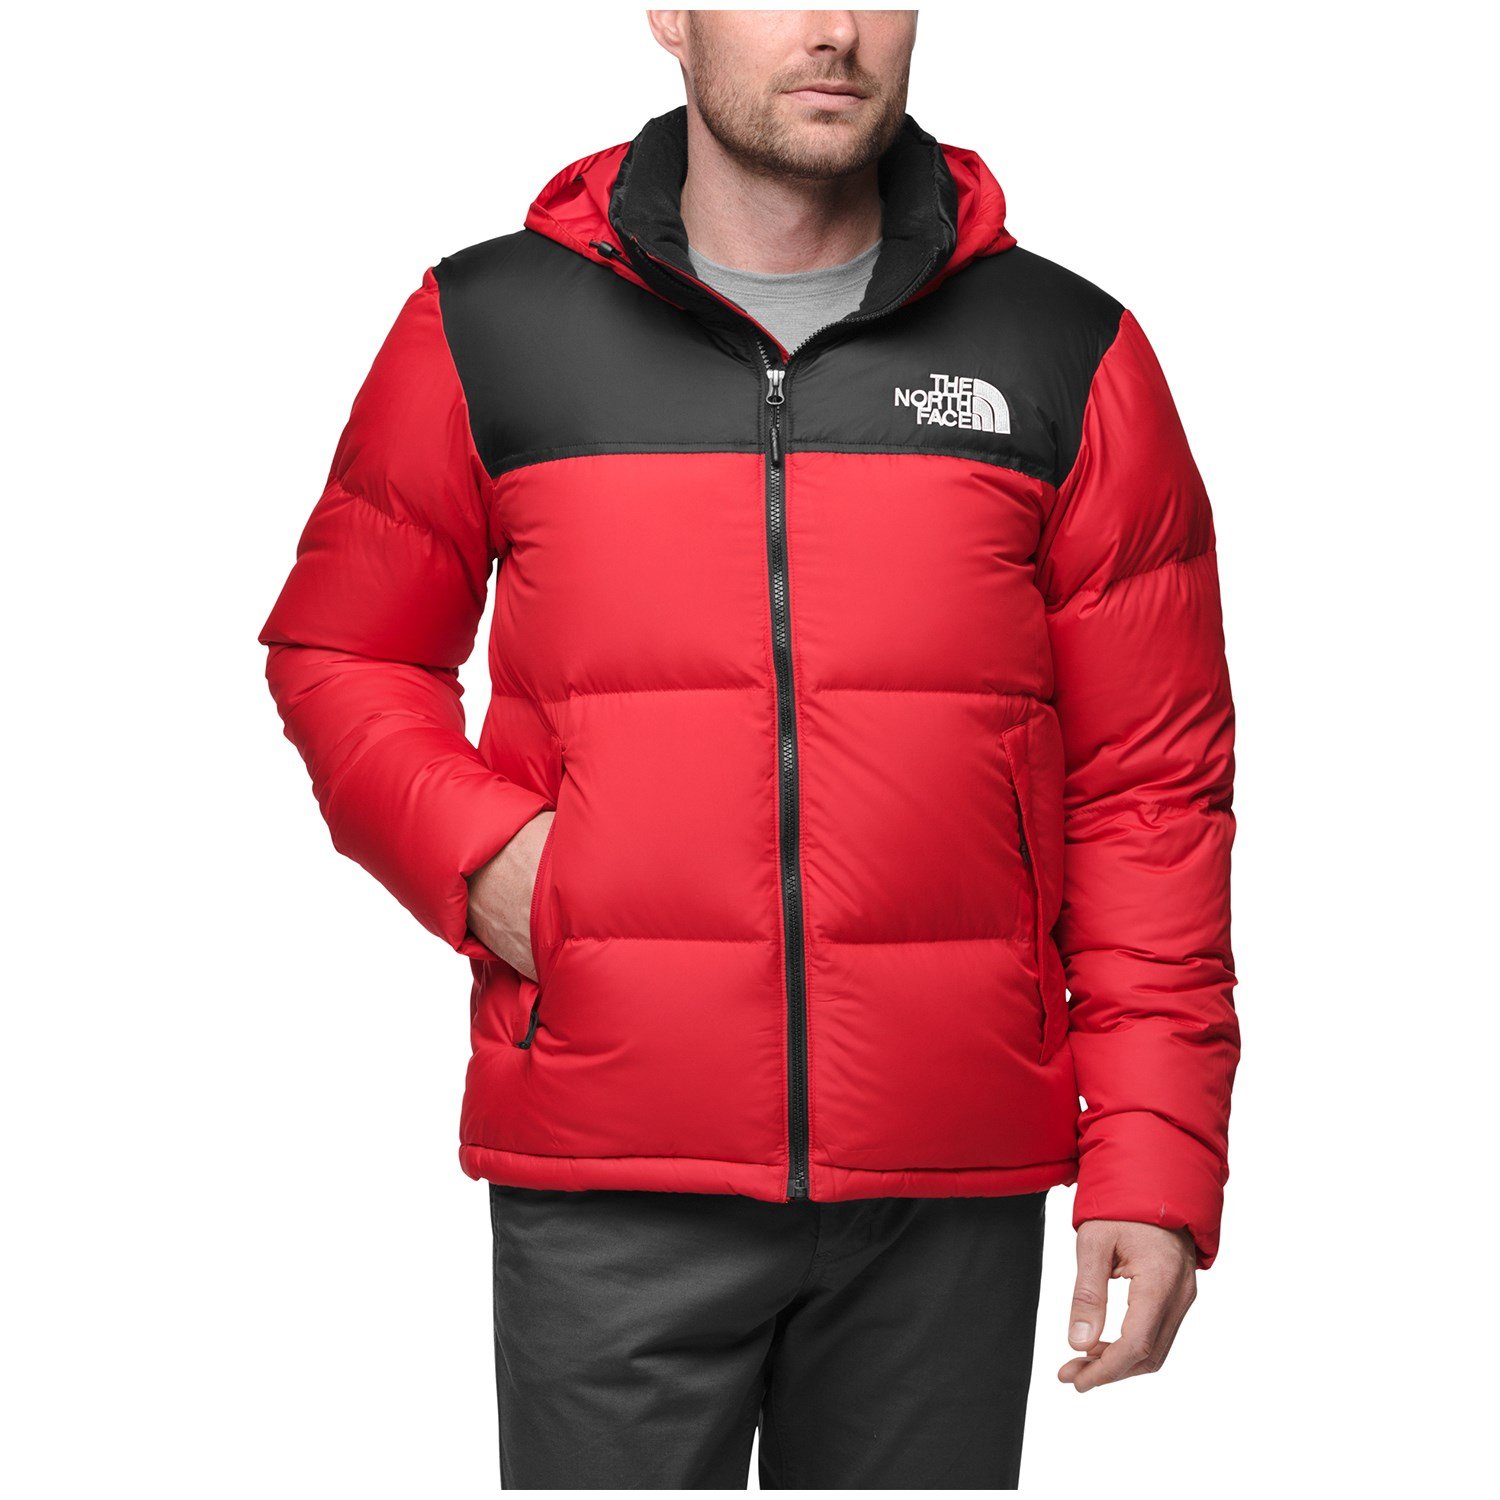 The North Face Nuptse Flash Sales, 63% OFF | www 